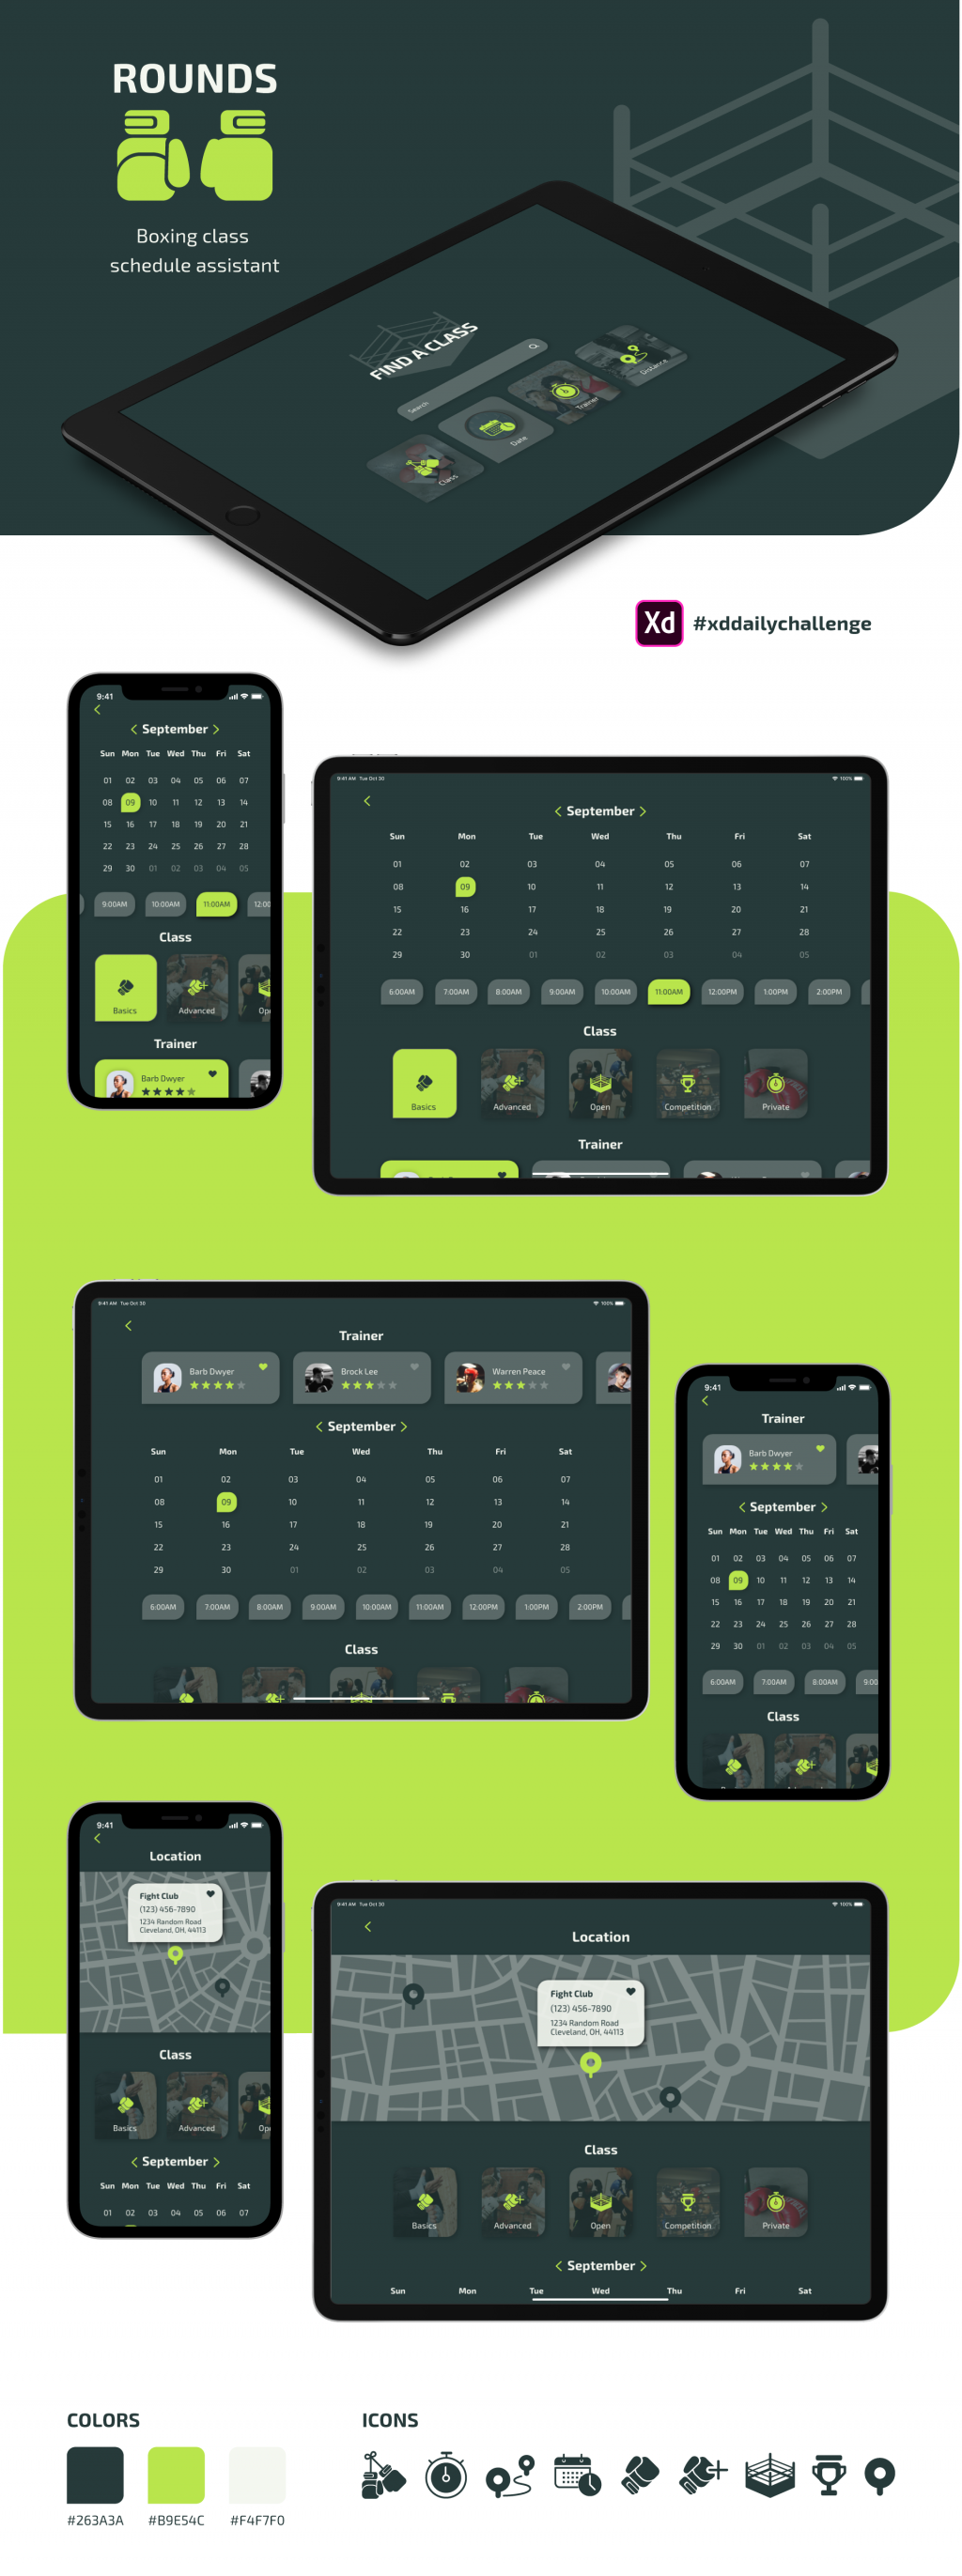 Mockup for a design for a gym class scheduling app.